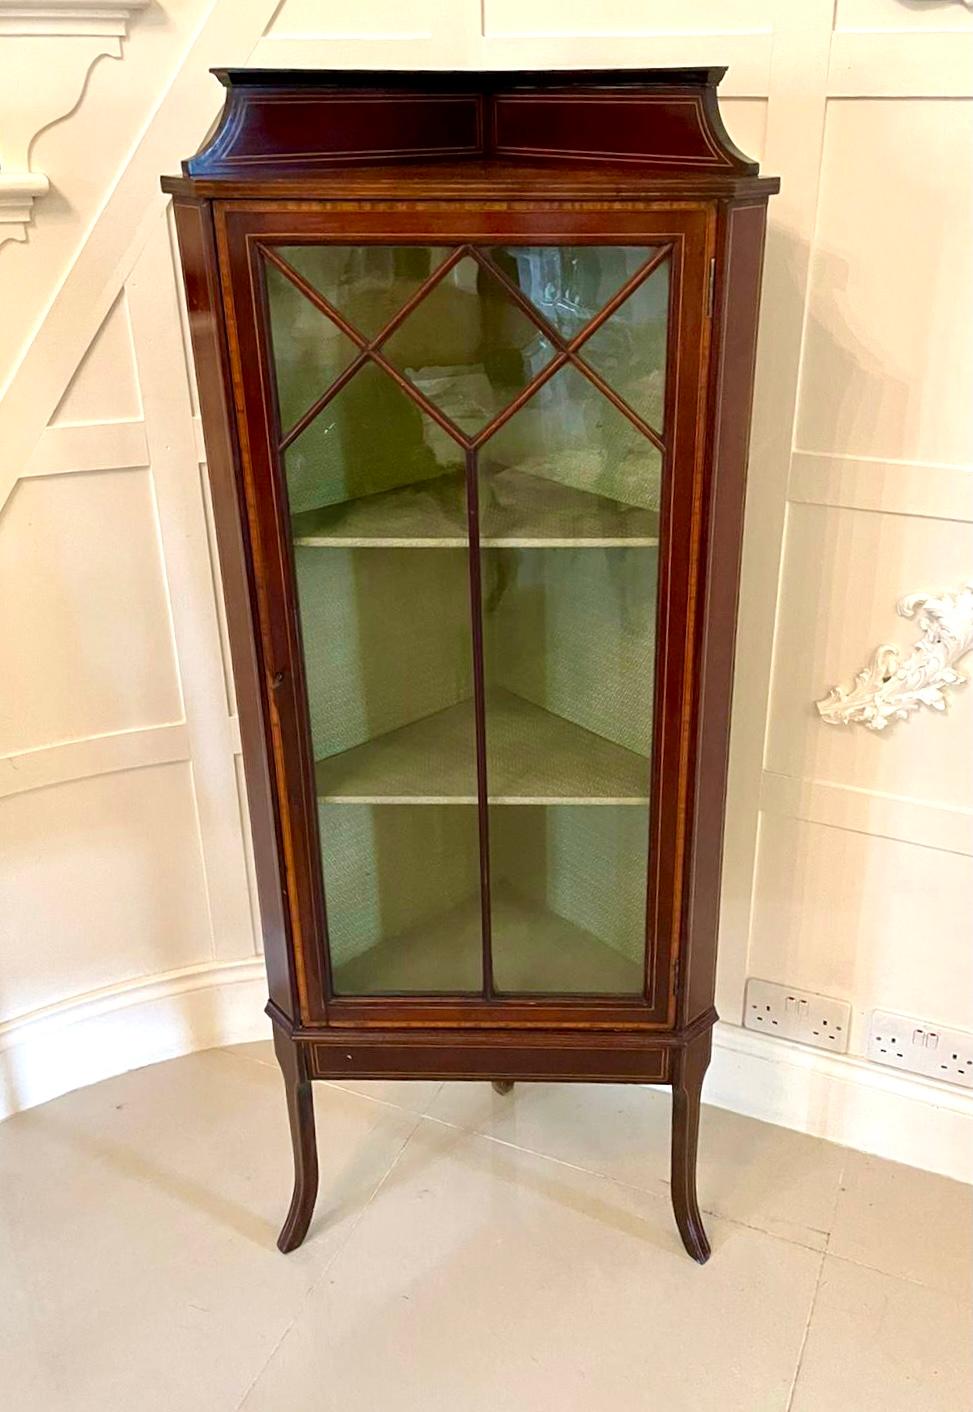 Antique Edwardian Inlaid Mahogany Corner Display Cabinet In Good Condition For Sale In Suffolk, GB